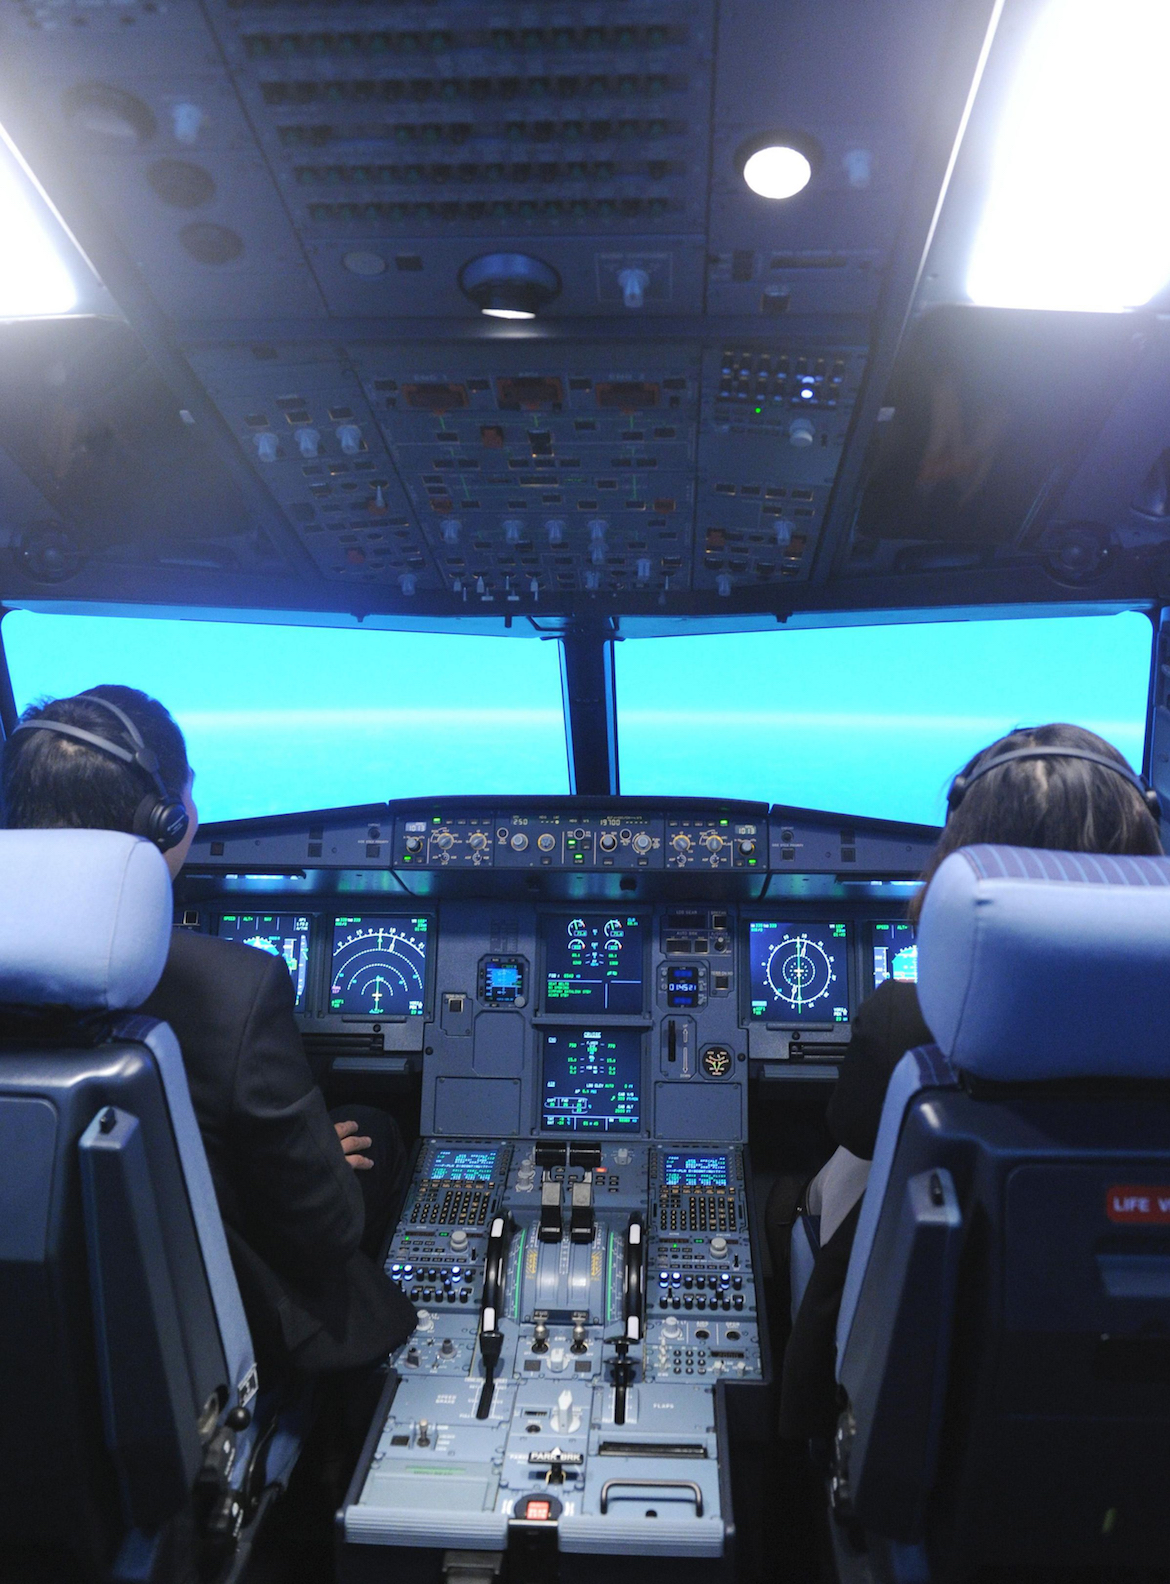 Airbus has embraced the Asian training revolution, including having an A320neo simulator in Beijing. (Airbus)